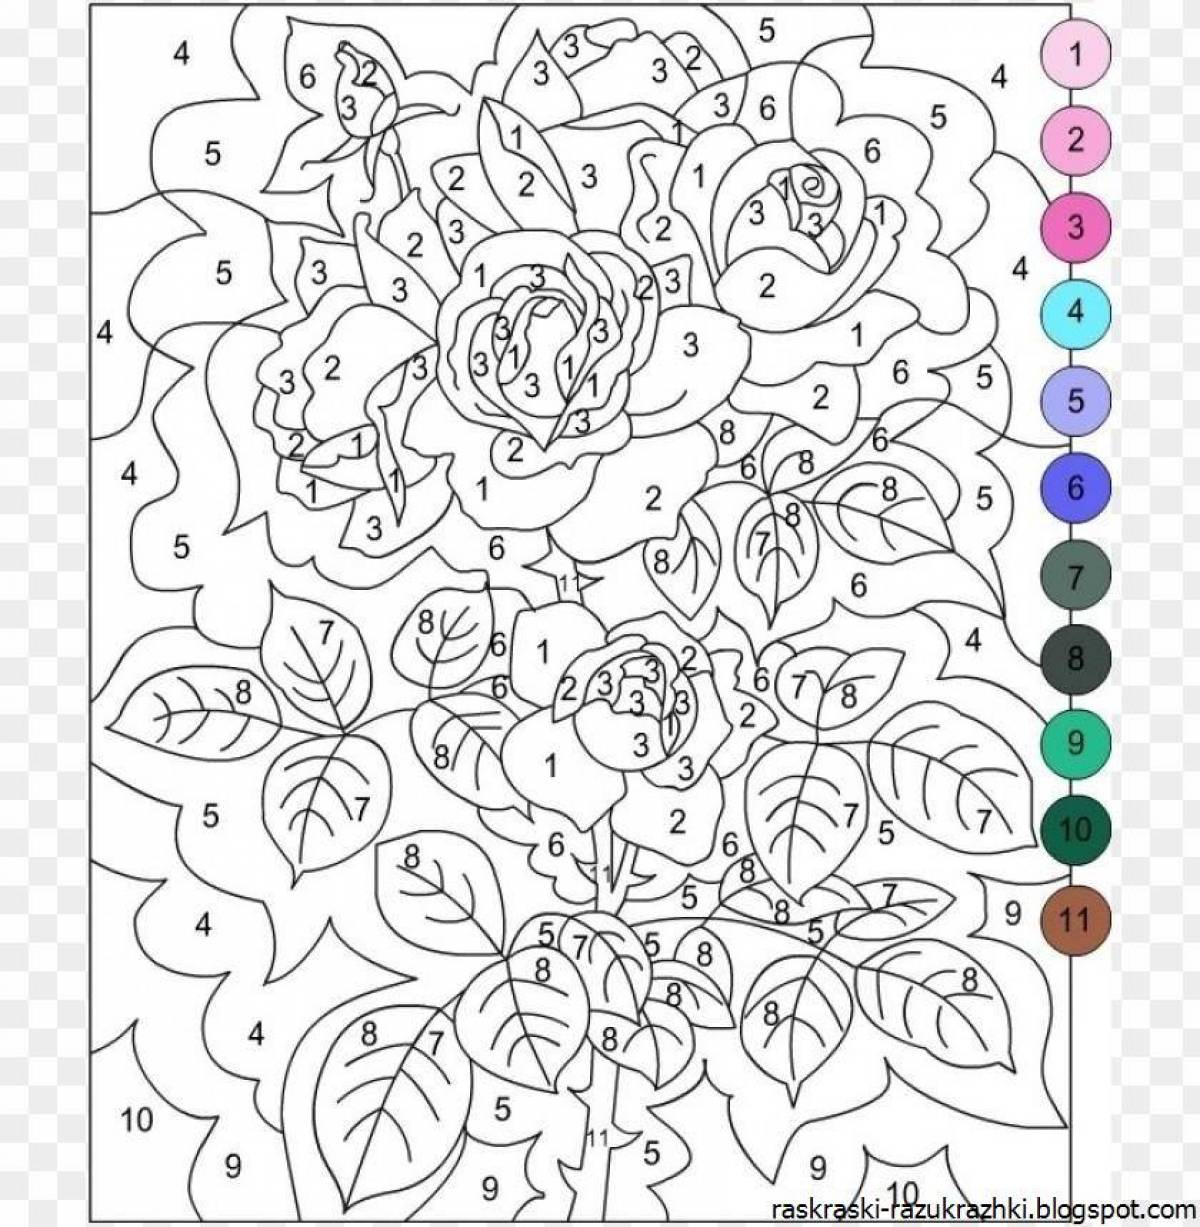 Inspirational coloring by numbers